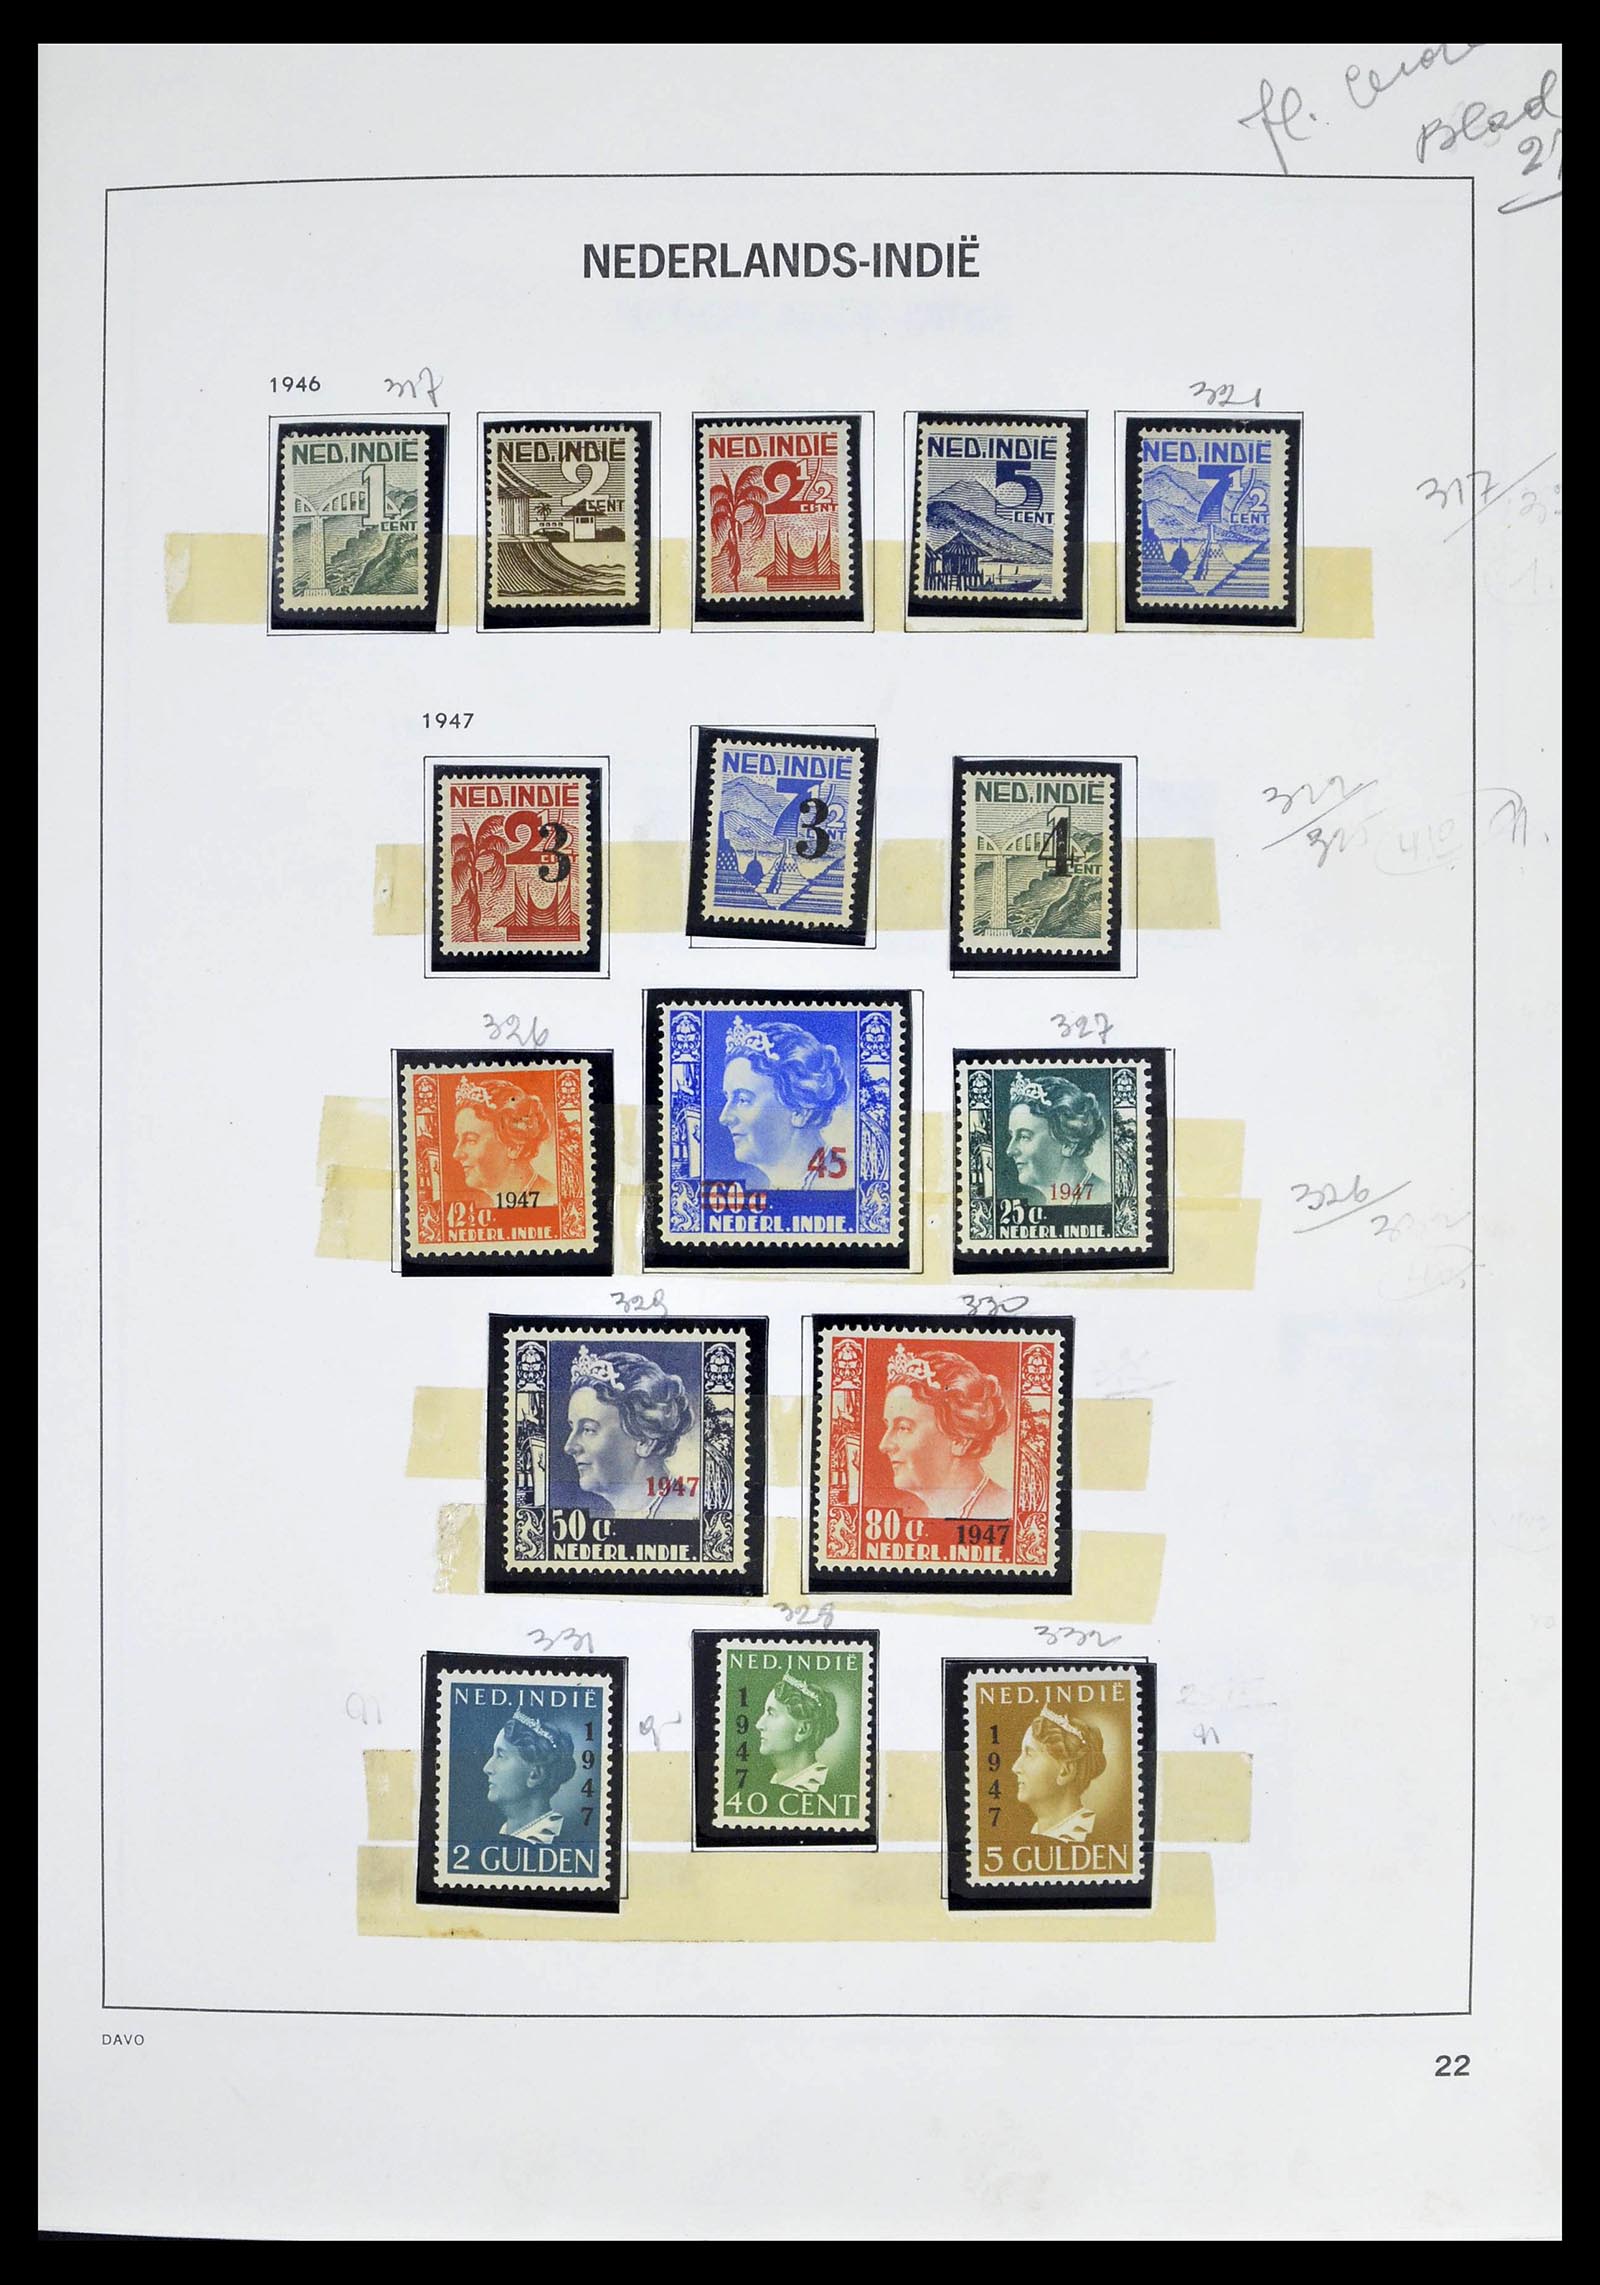 39263 0025 - Stamp collection 39263 Dutch territories 1864-1970.